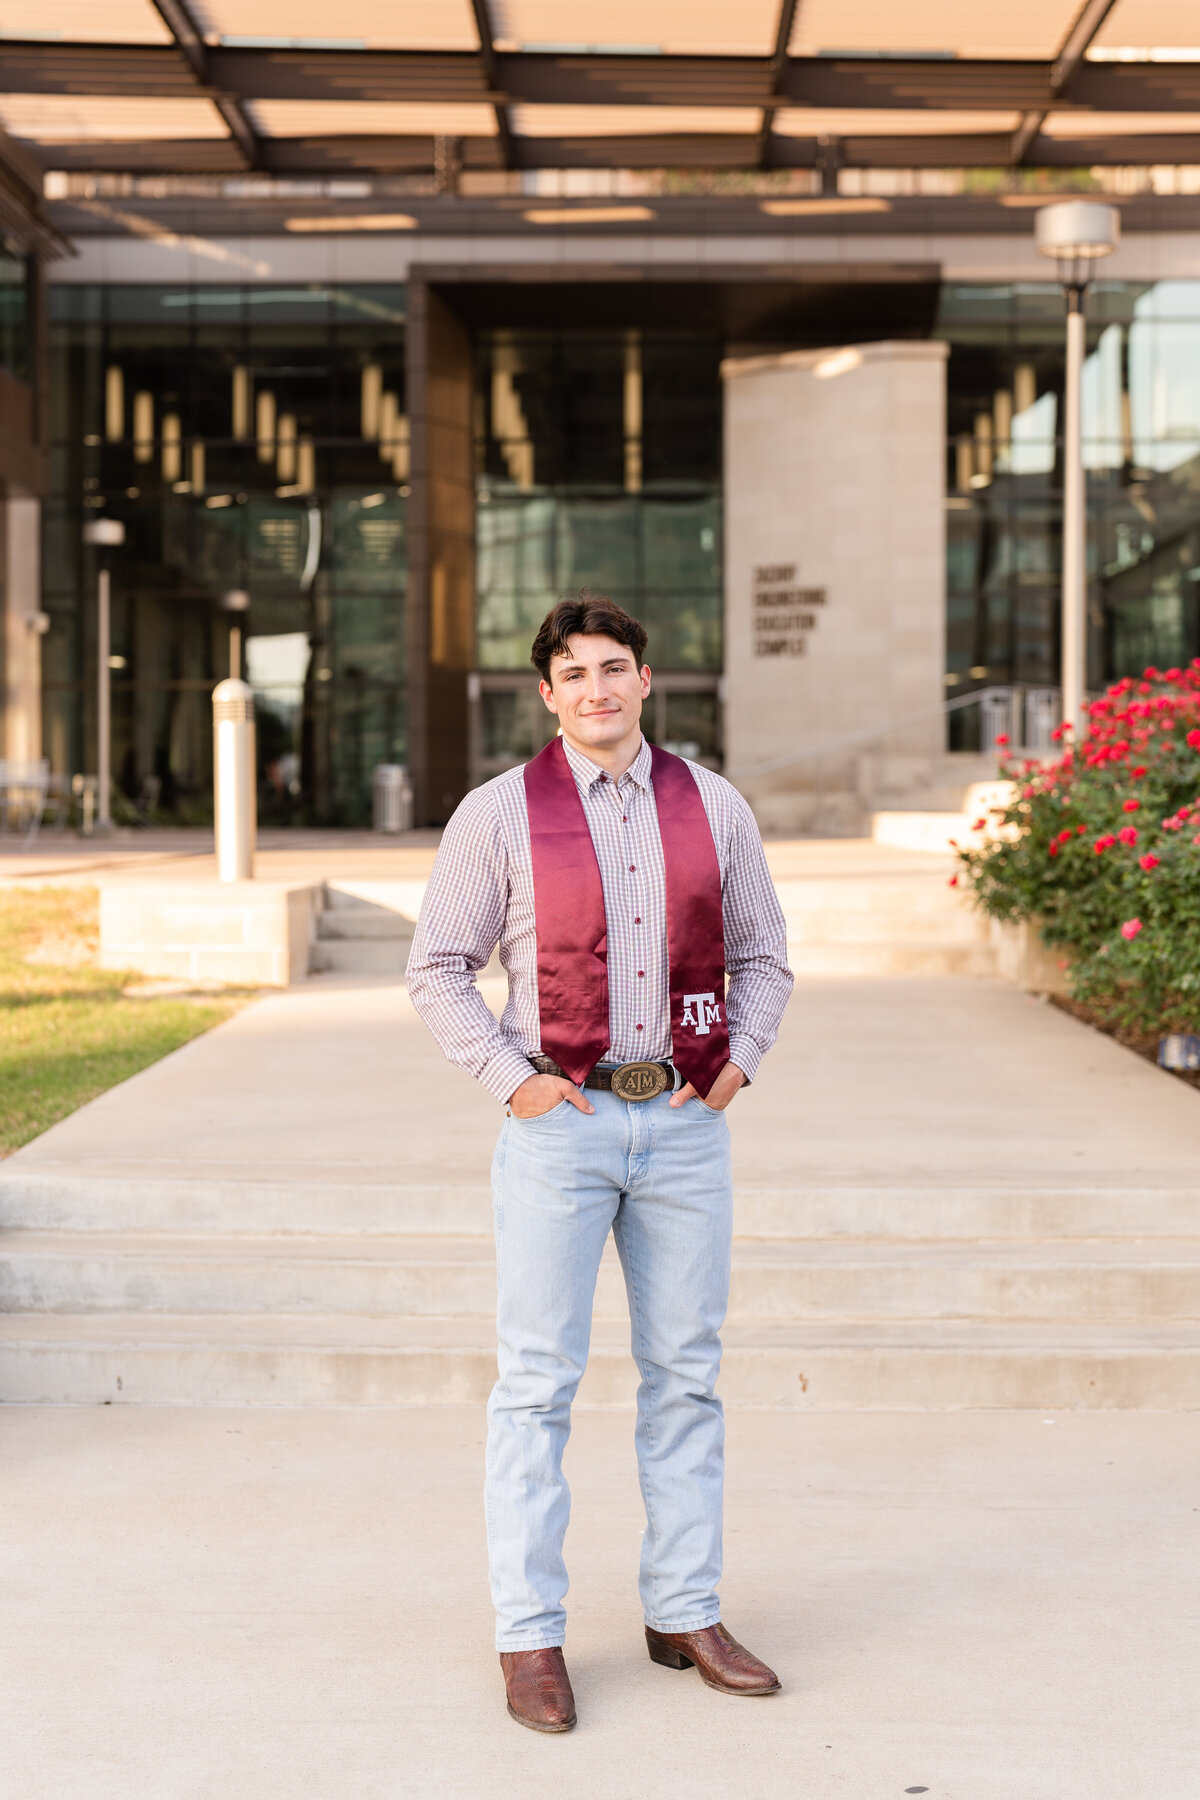 Texas A&M senior guy standing with hands in pocket and light wash jeans with button up top and Aggie stole in front of Zachry Engineering Complex